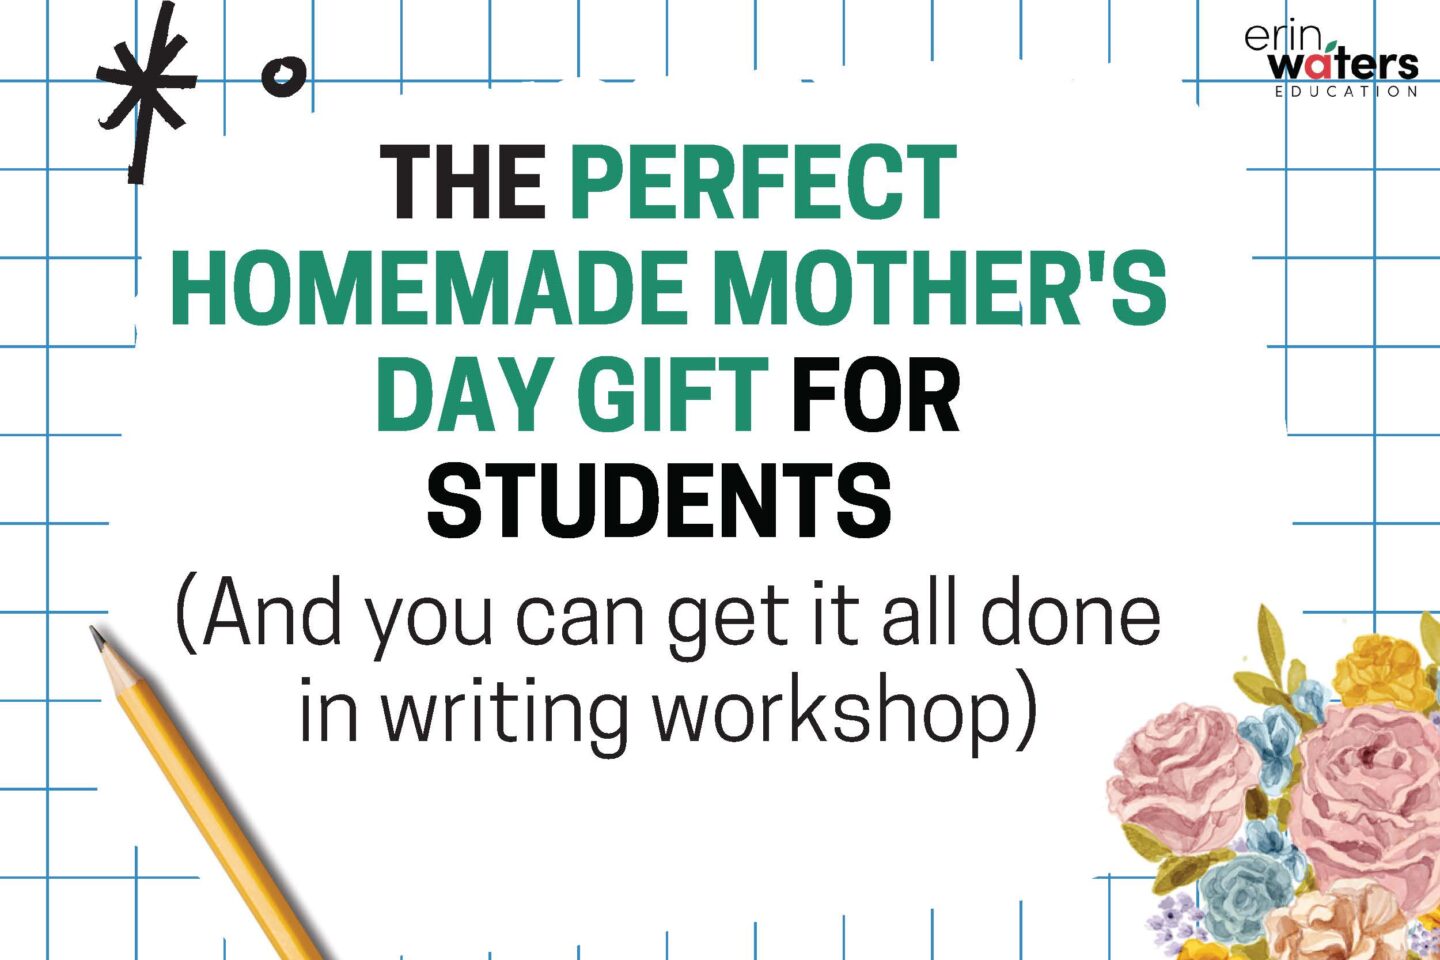 A cover image showing the title, "The Perfect Homemade Mother's Day Gift for Students." There is a pencil and a bouquet of flowers against a light blue grid paper background.